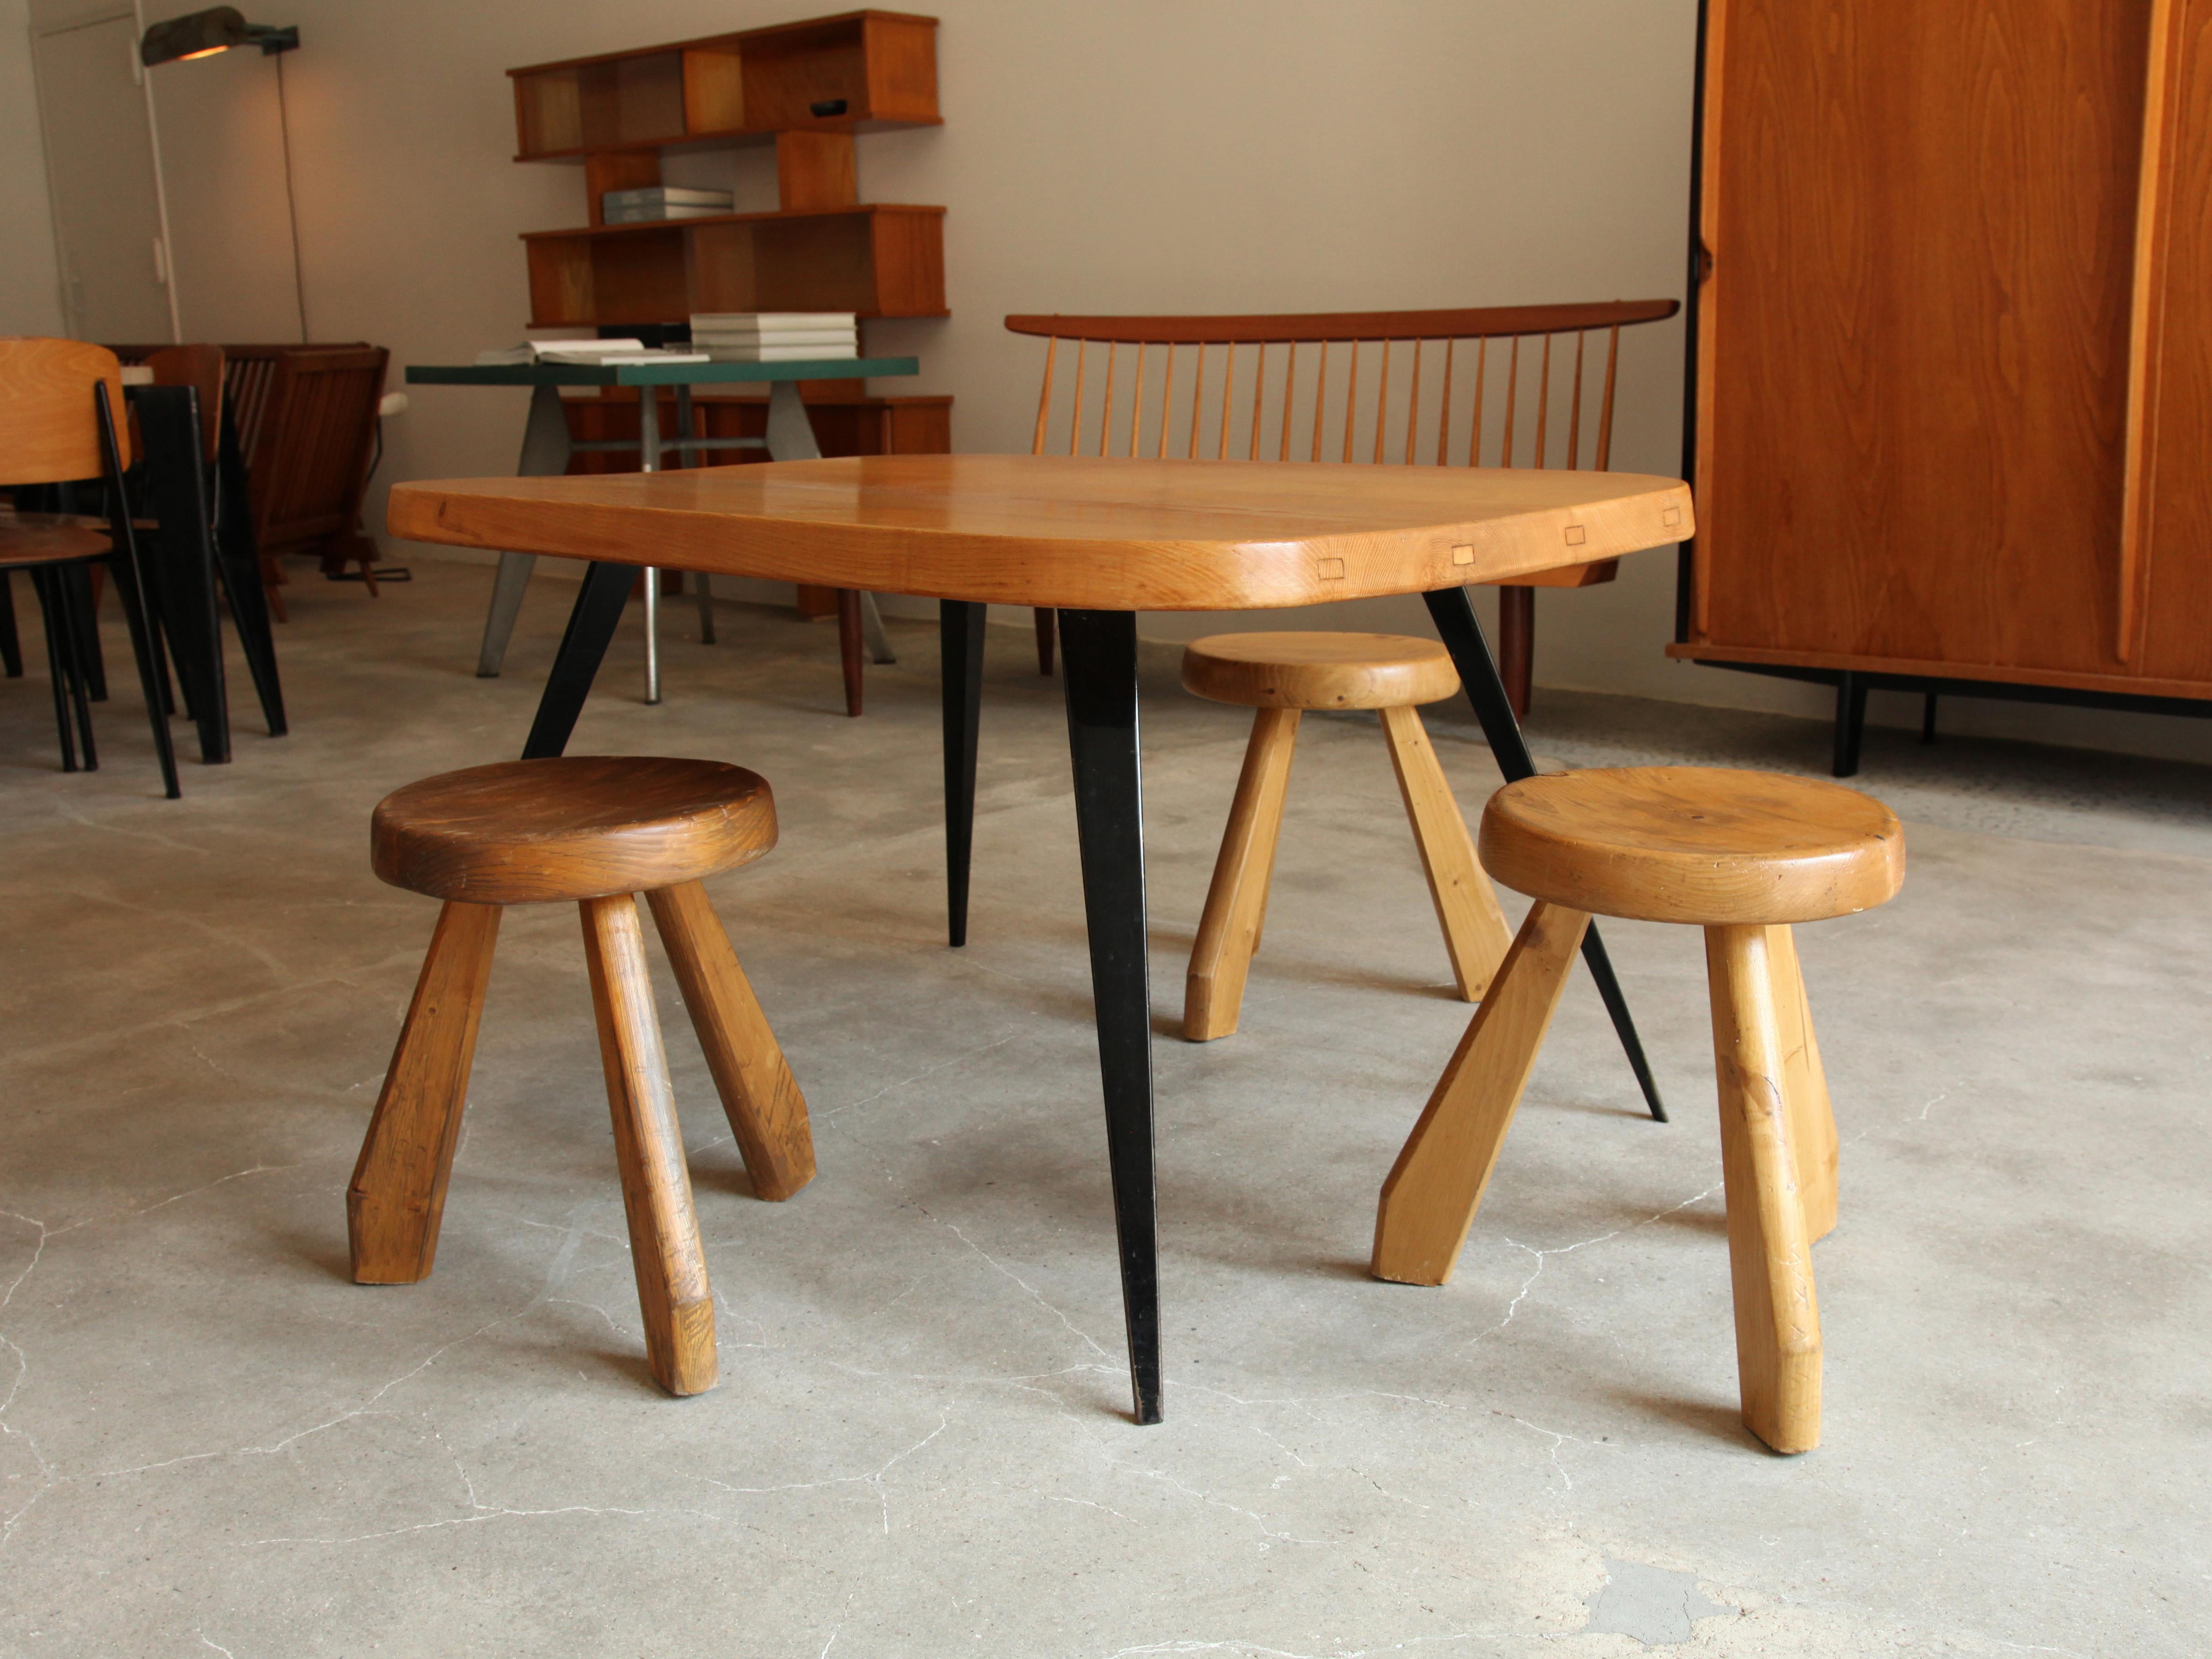 20th Century Charlotte Perriand, Stools from Les Arcs, Savoie, circa 1968